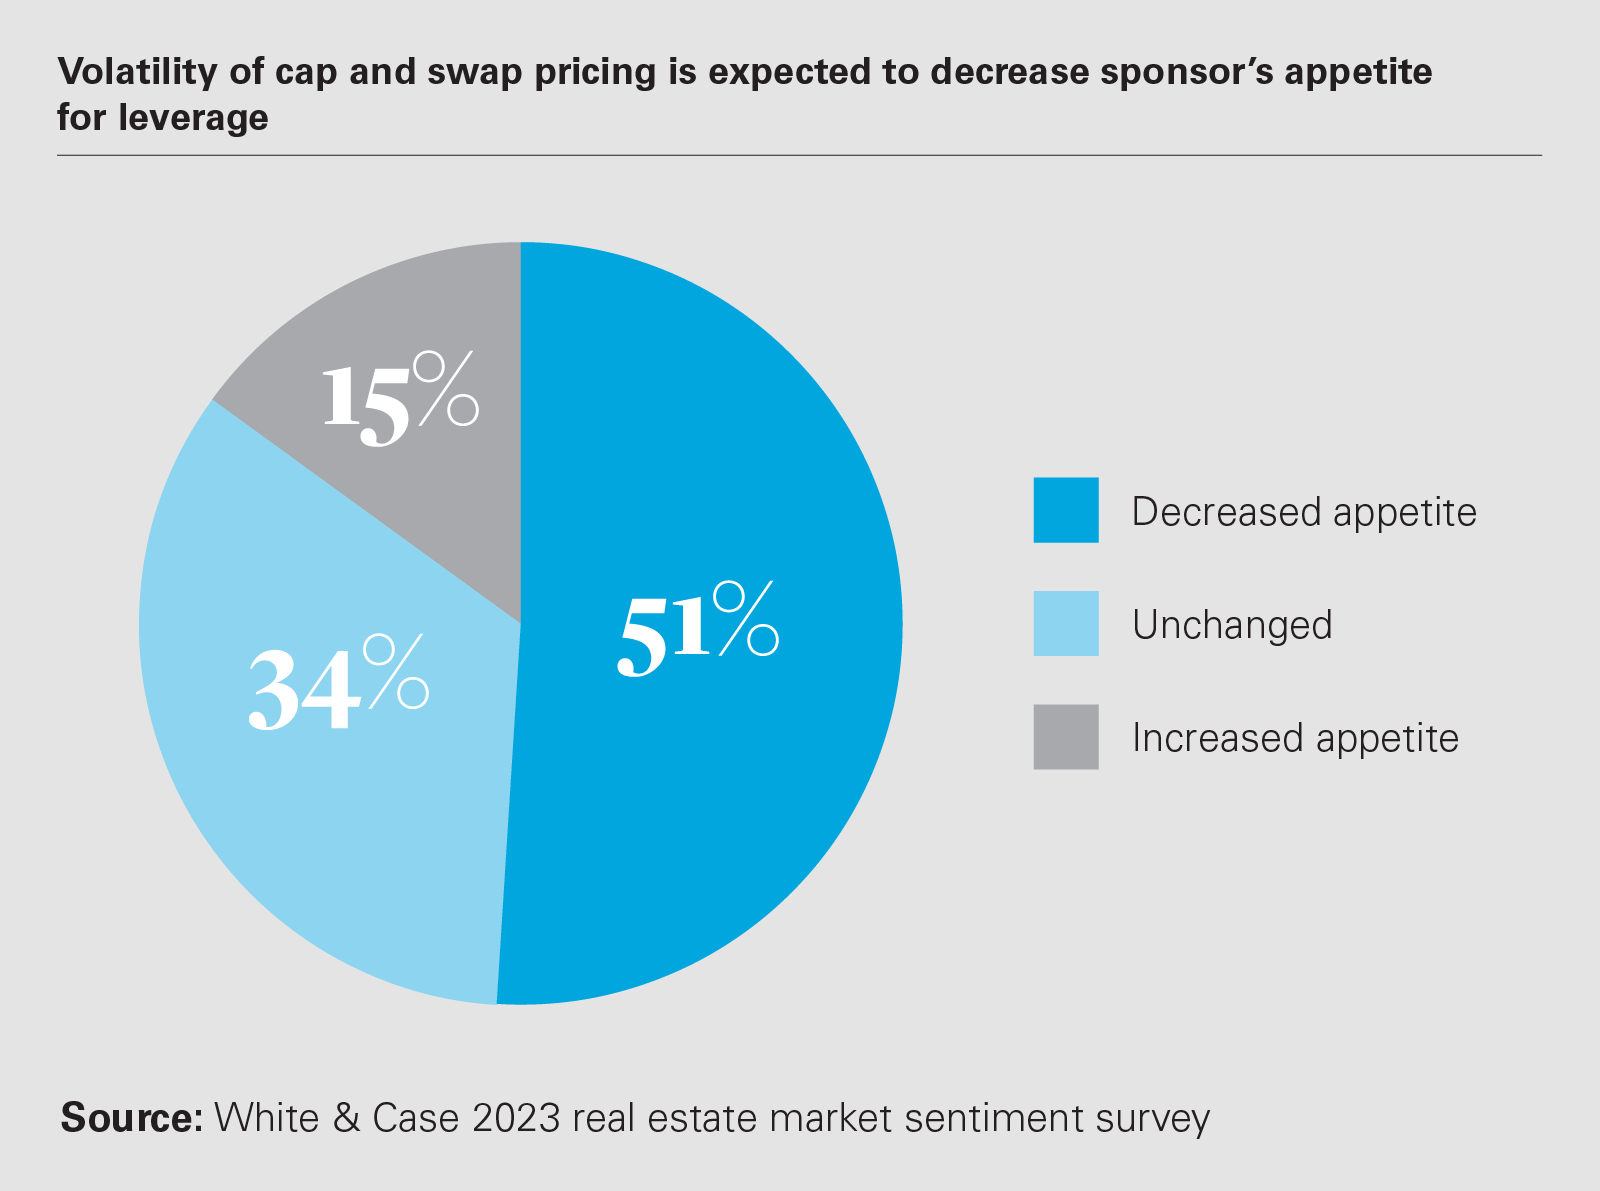 Volatility of cap and swap pricing is expected to decrease sponsor’s appetite for leverage